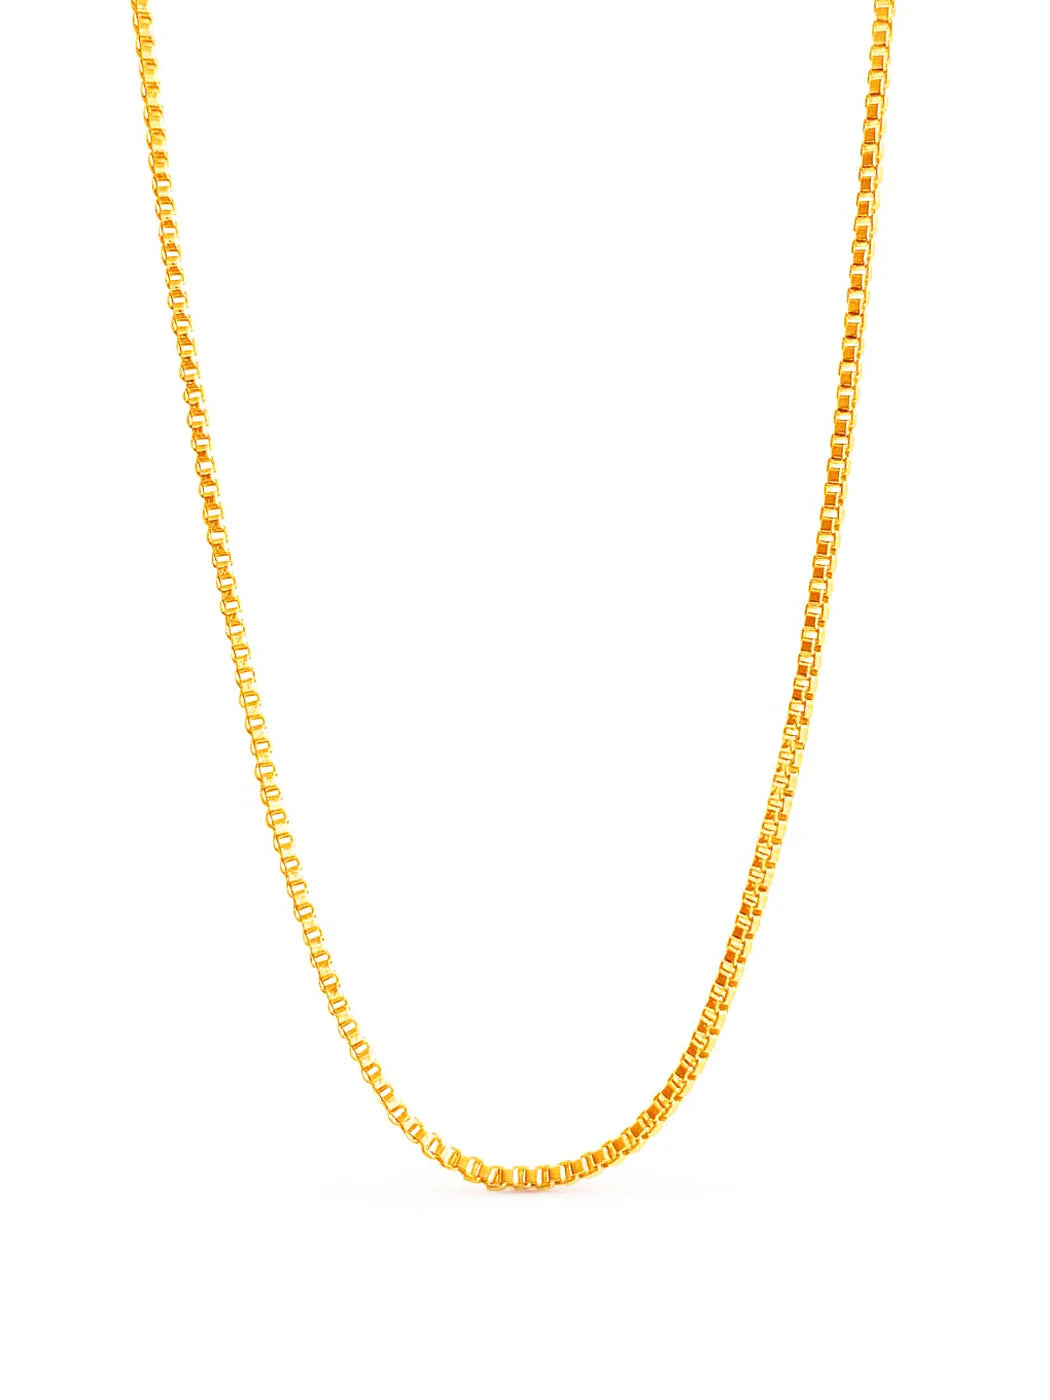 Bailey Box Necklace - Gold Plating